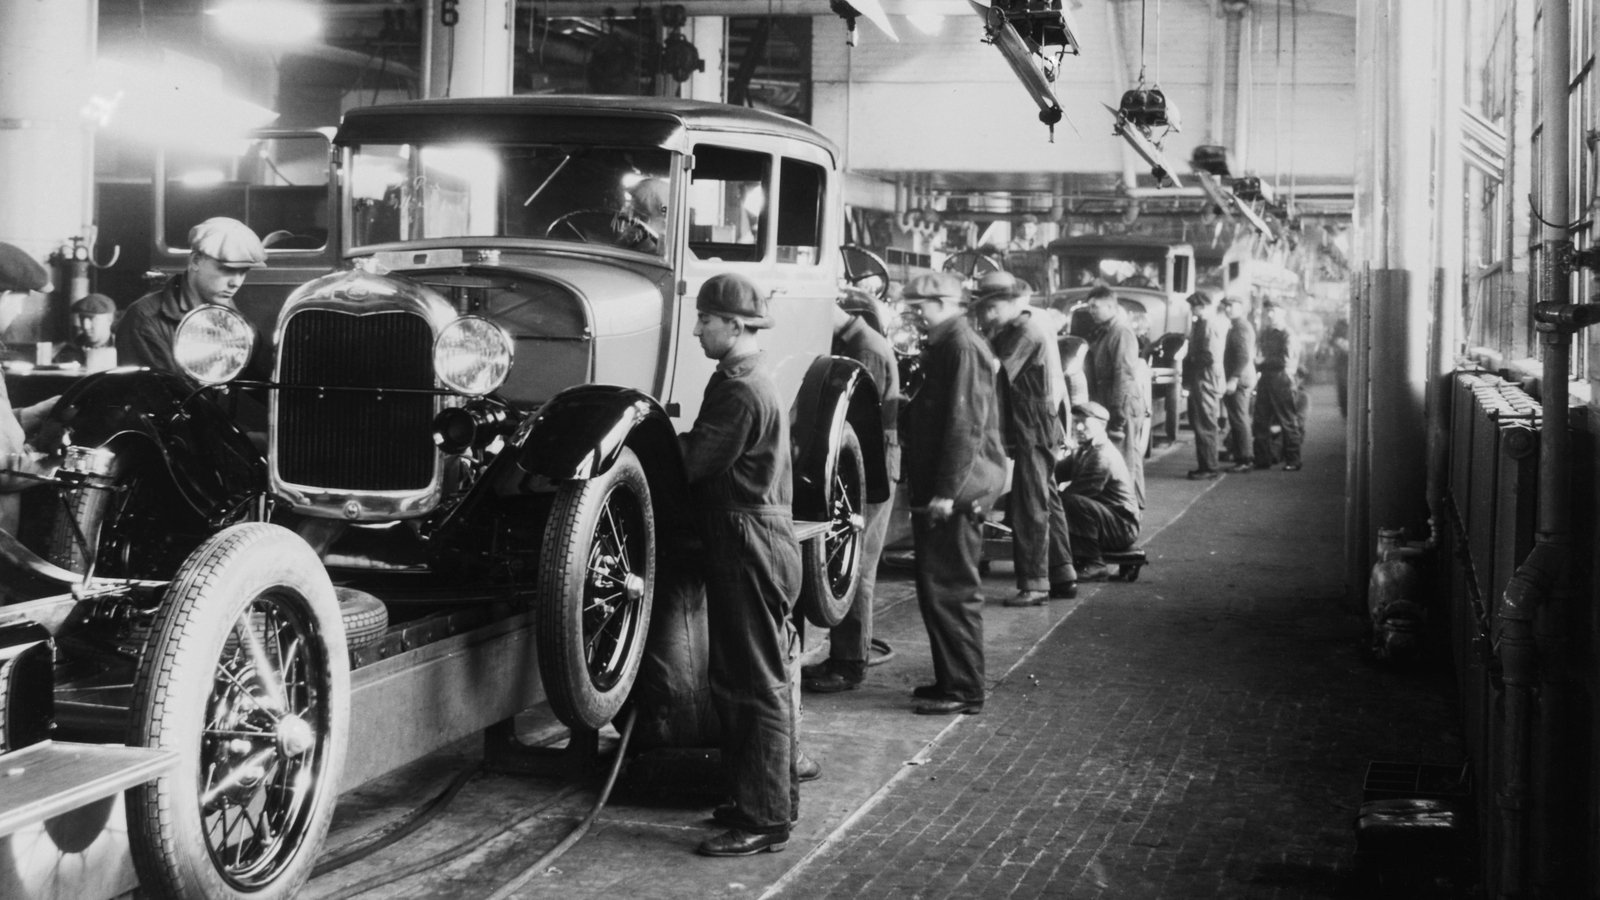 What can the assembly line teach us about innovation?